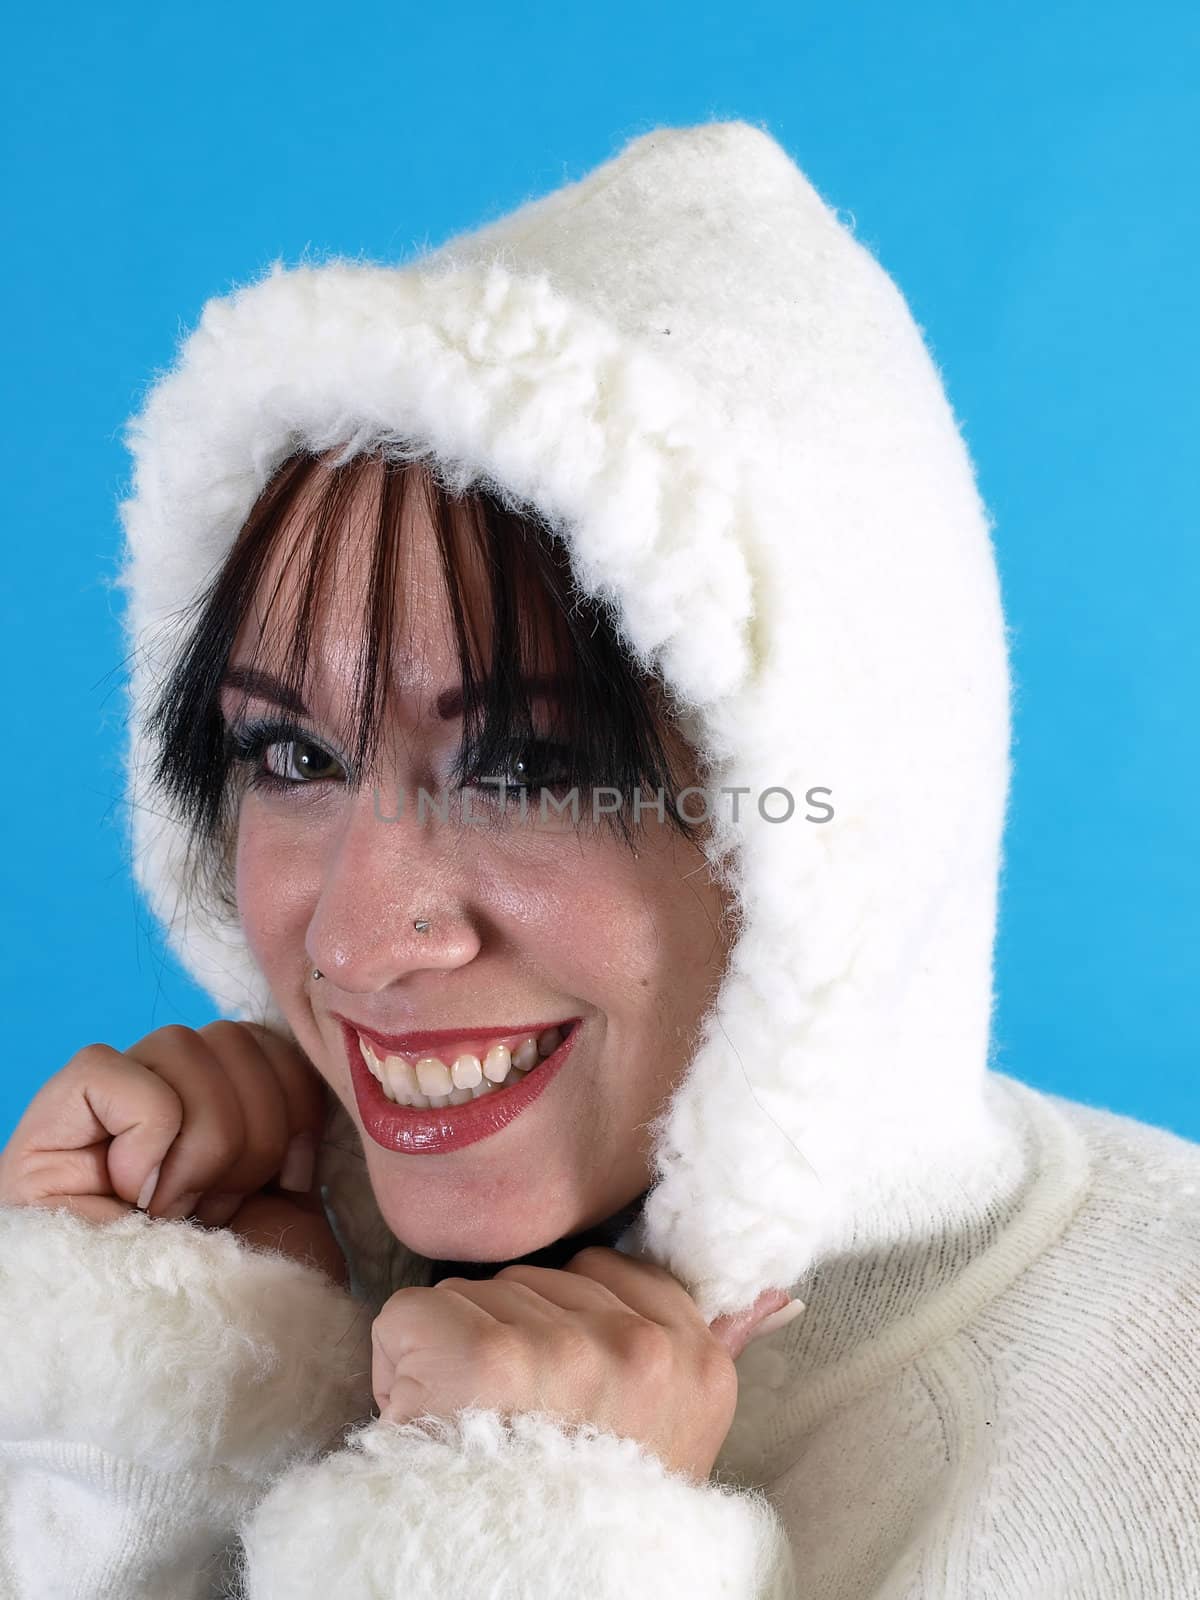 Beautiful brunette in a white hooded sweater, artificial snow falling down around her, against a blue background.